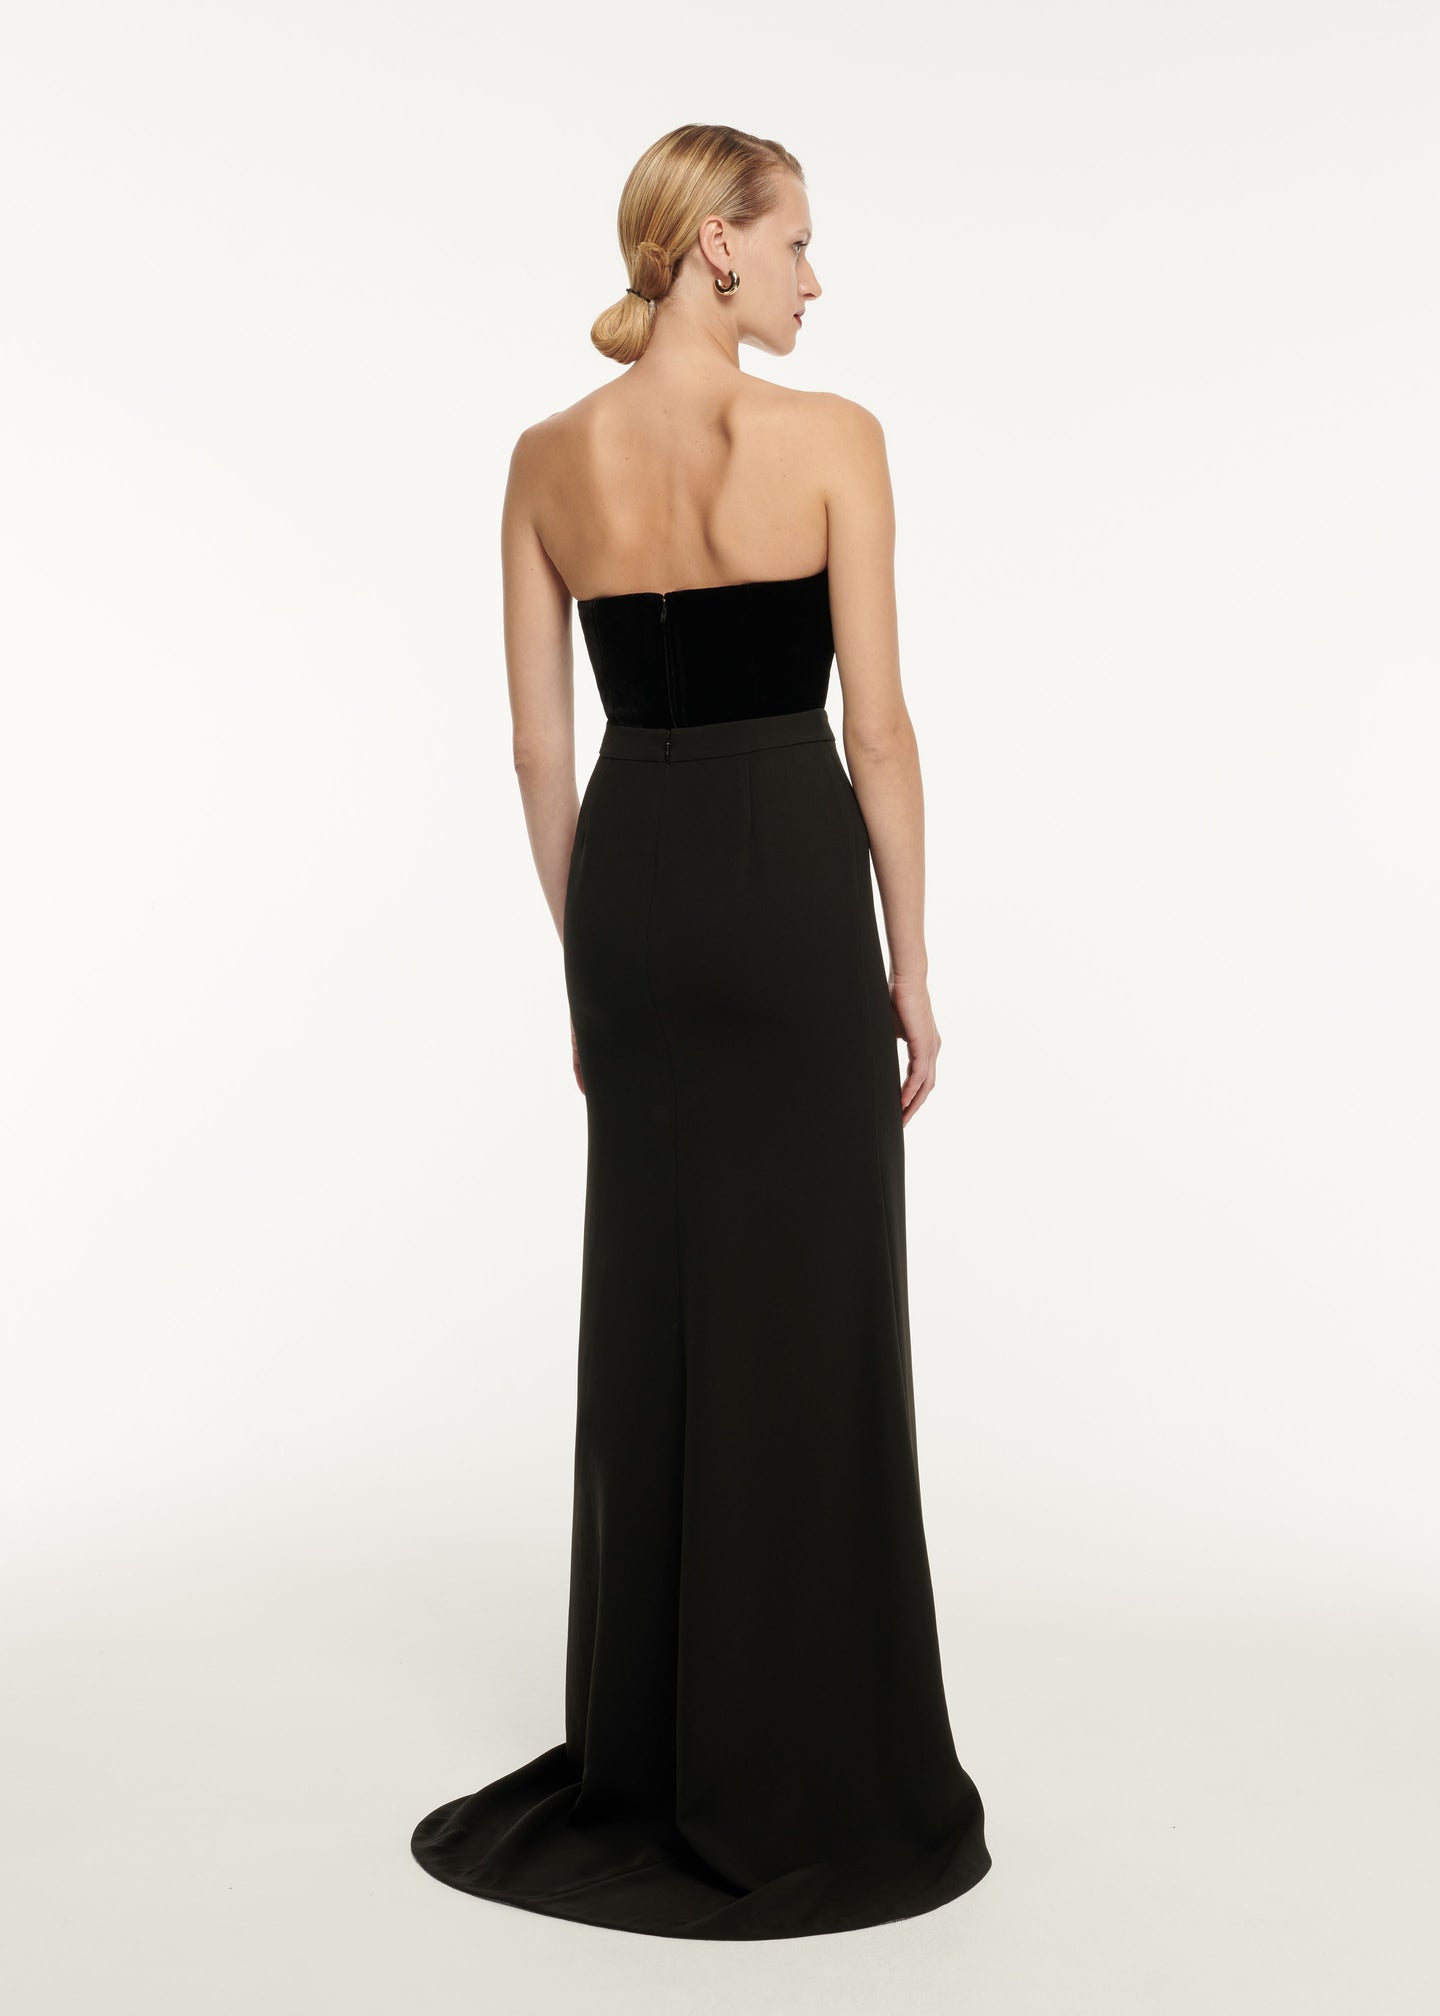 The back of a woman wearing the Cape Sleeve Stretch Cady Maxi Dress